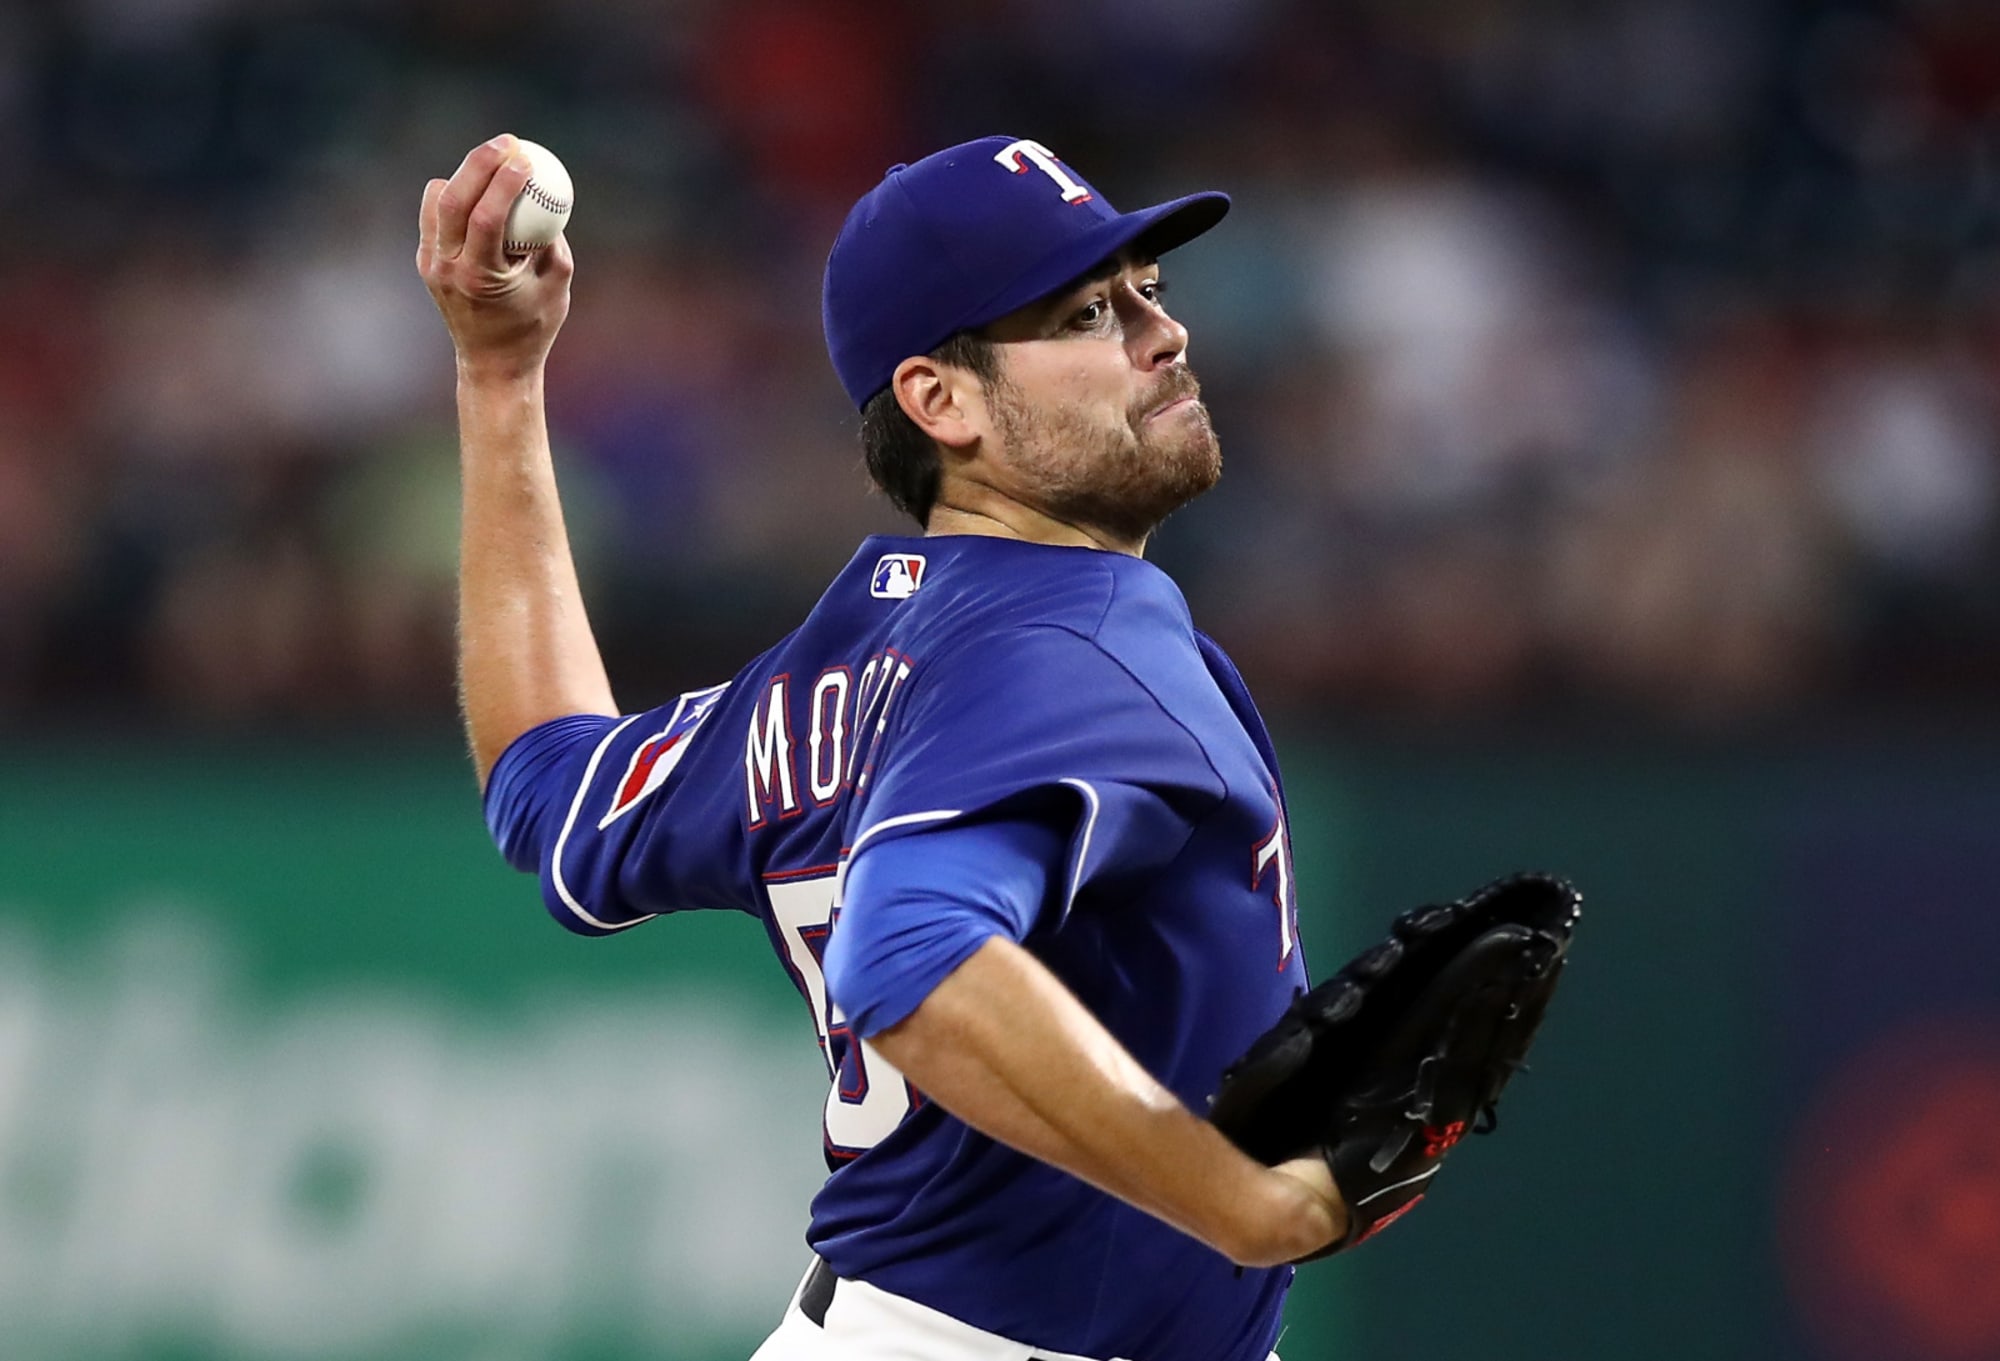 Chicago Cubs Rumors DoubleDip trading with the Texas Rangers?